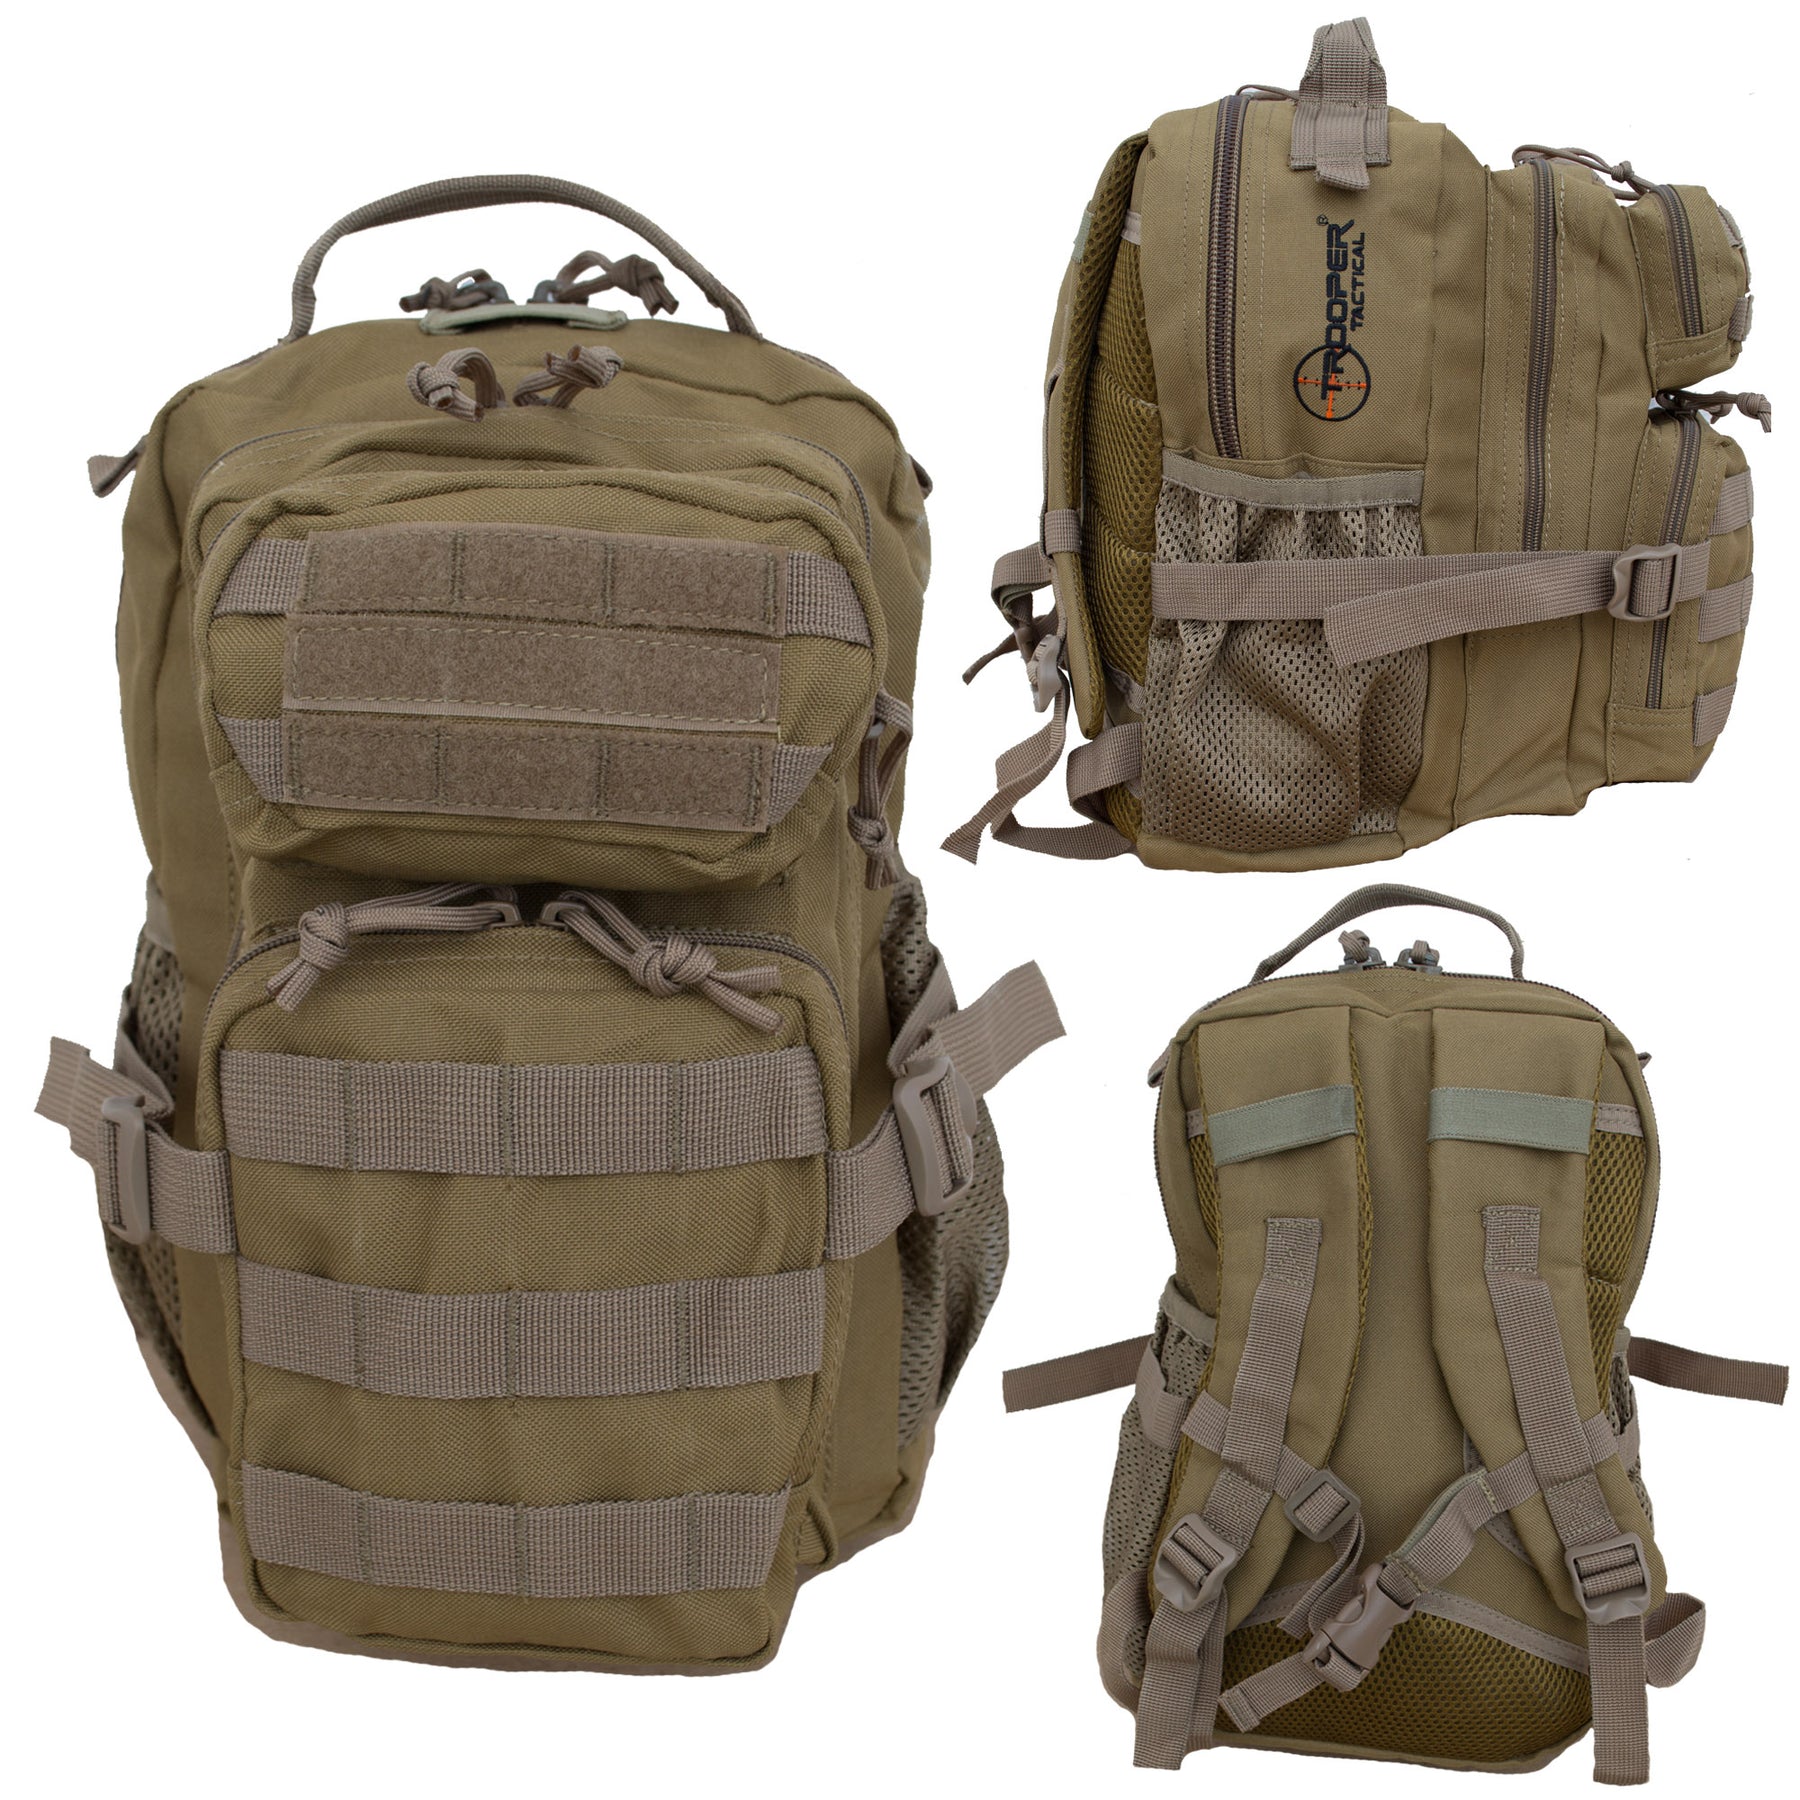 Tactical Backpacks. Military Assault Packs for Civil and Army